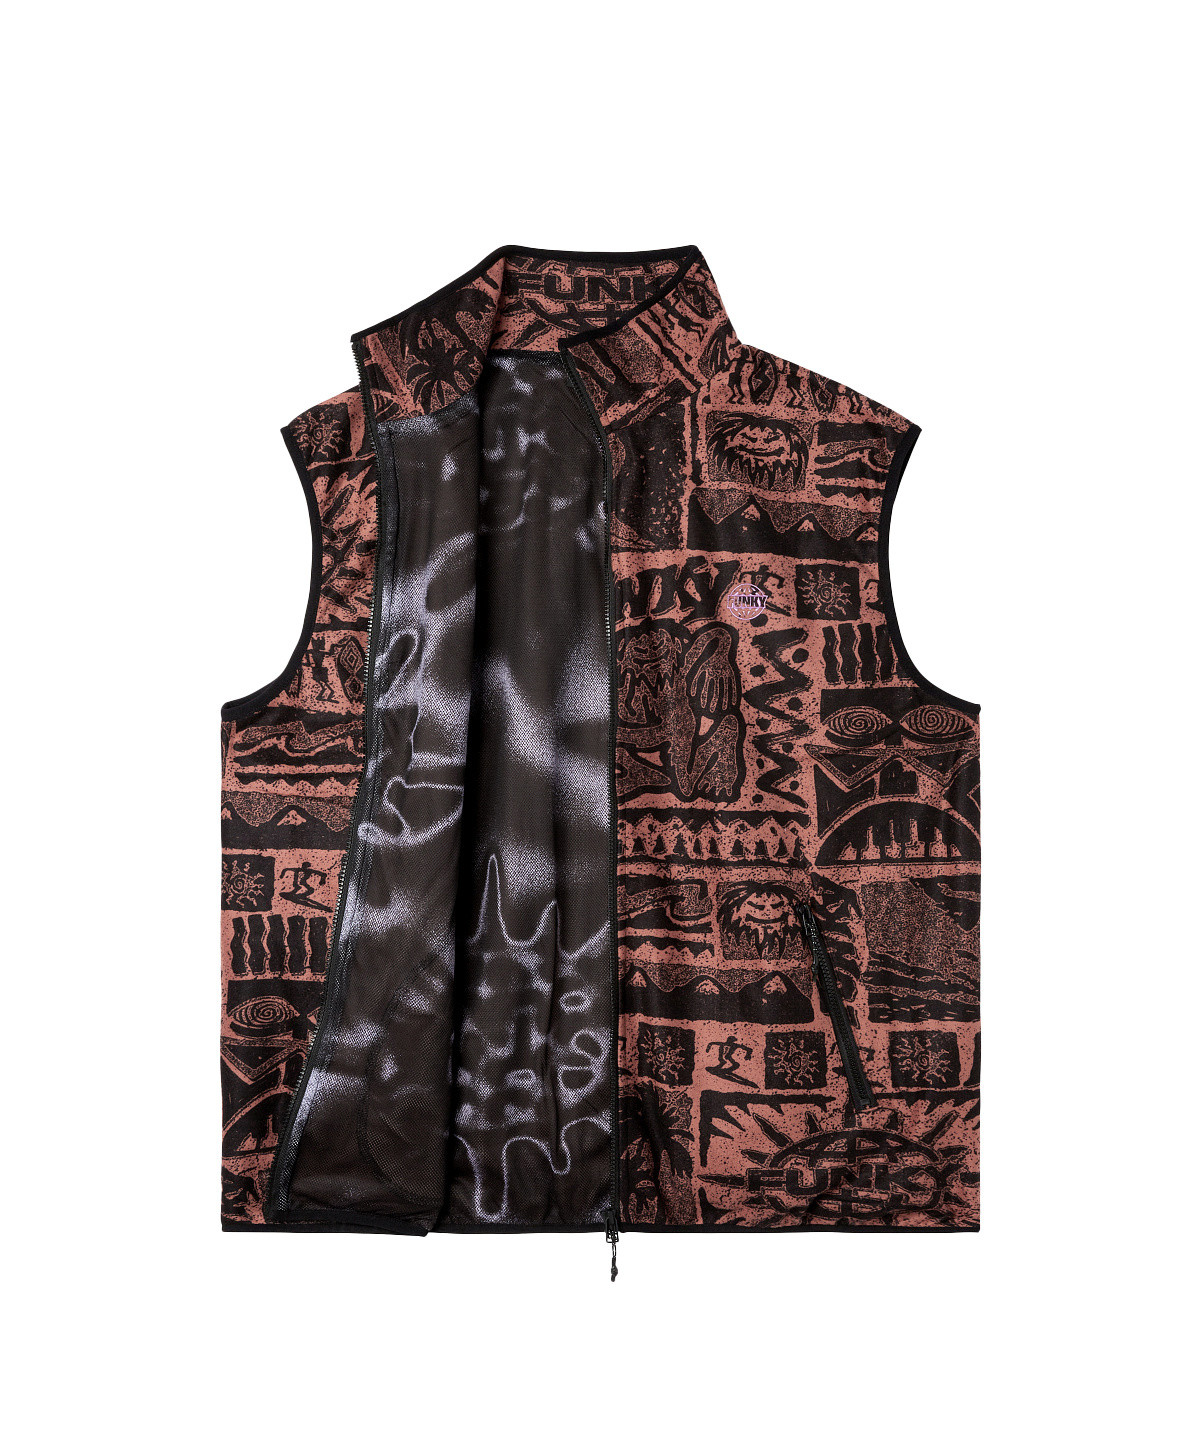 Funky - Gilet in pile motivo tribale, Marrone, large image number 1